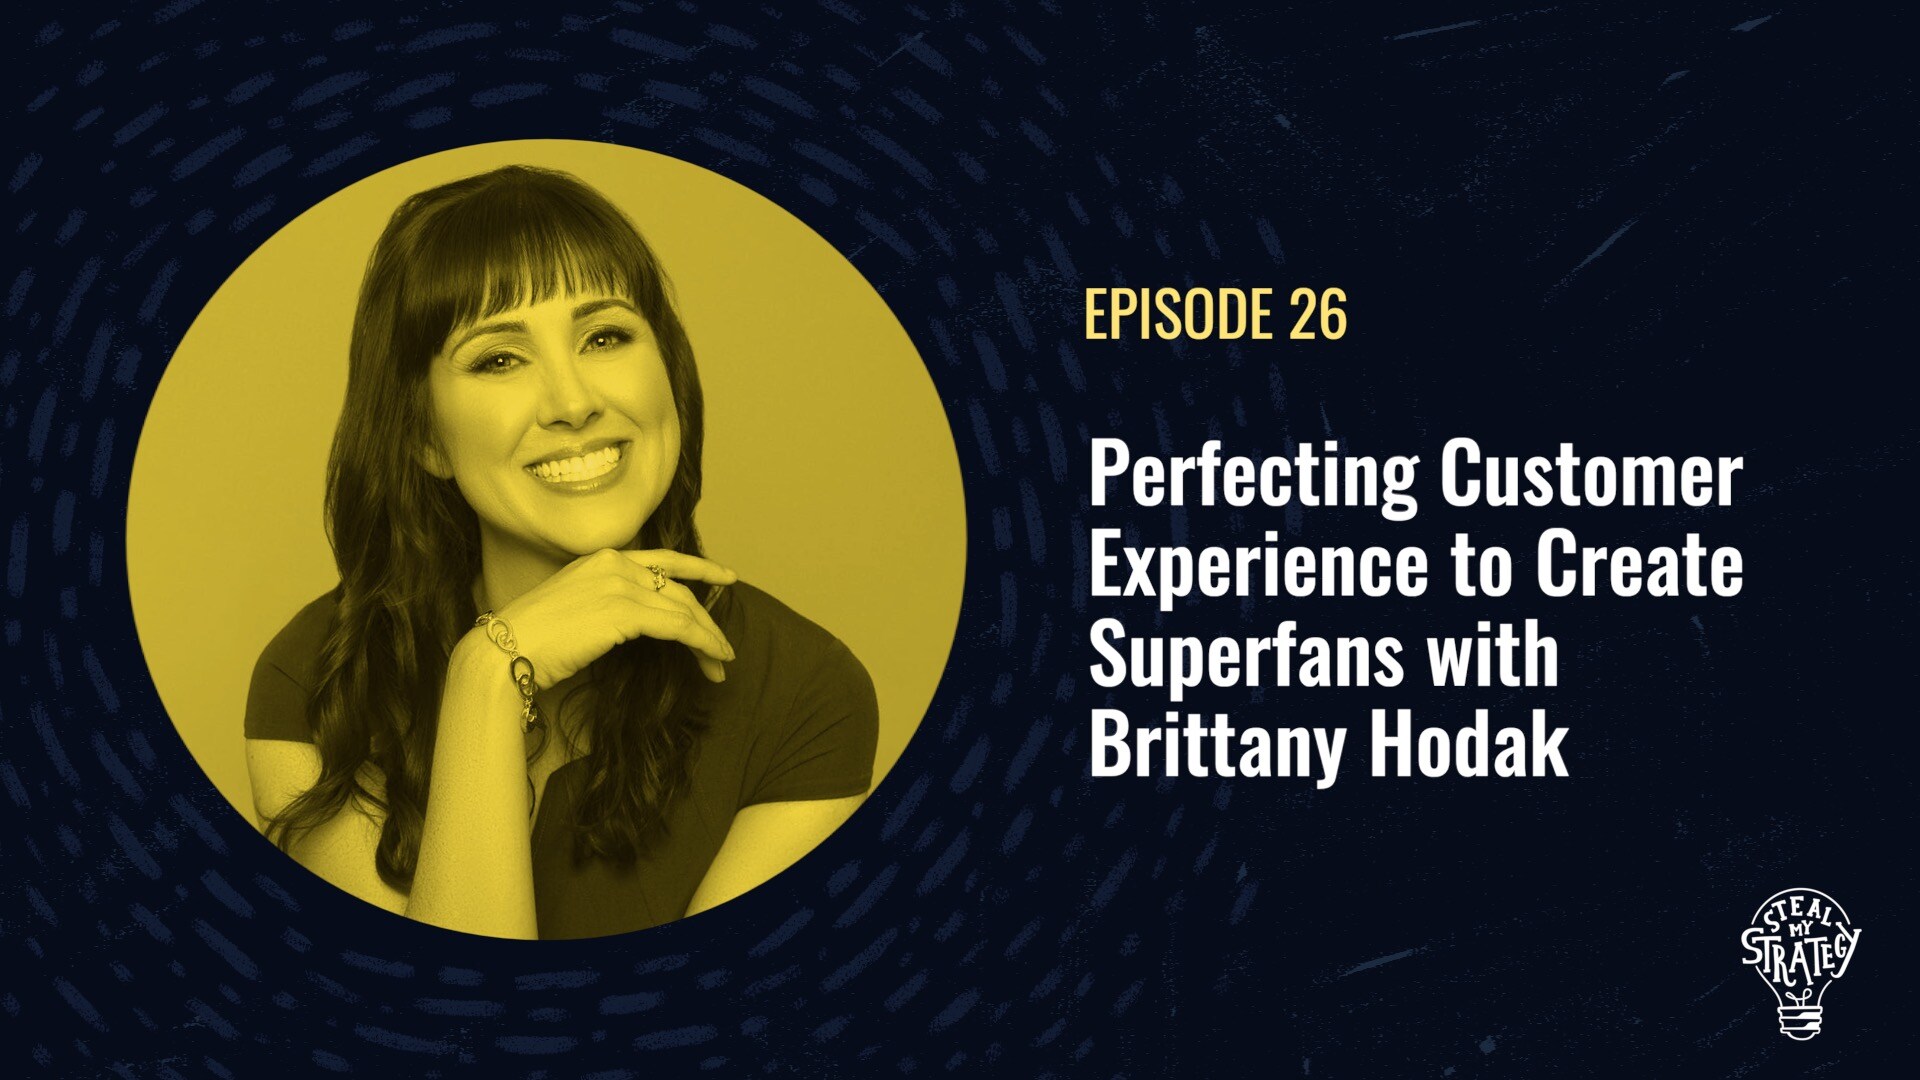 [Podcast] Steal My Strategy: Perfecting Customer Experience to Create Superfans with Brittany Hodak